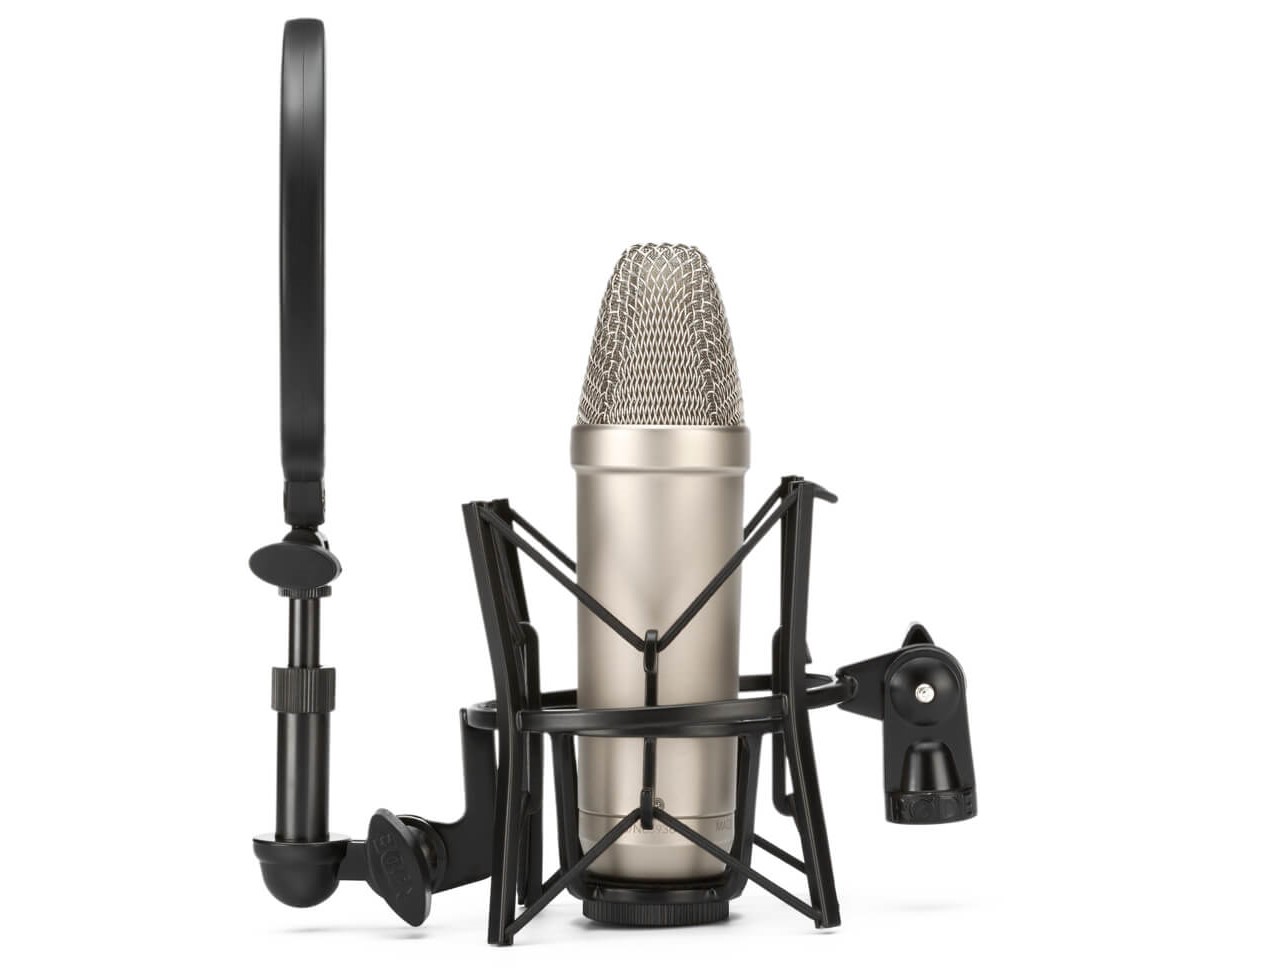 Shure SM7B vs Rode NT1A: The NT1-A is one of the quietest studio microphones in the world, with a self-noise of just 5dB(A). 